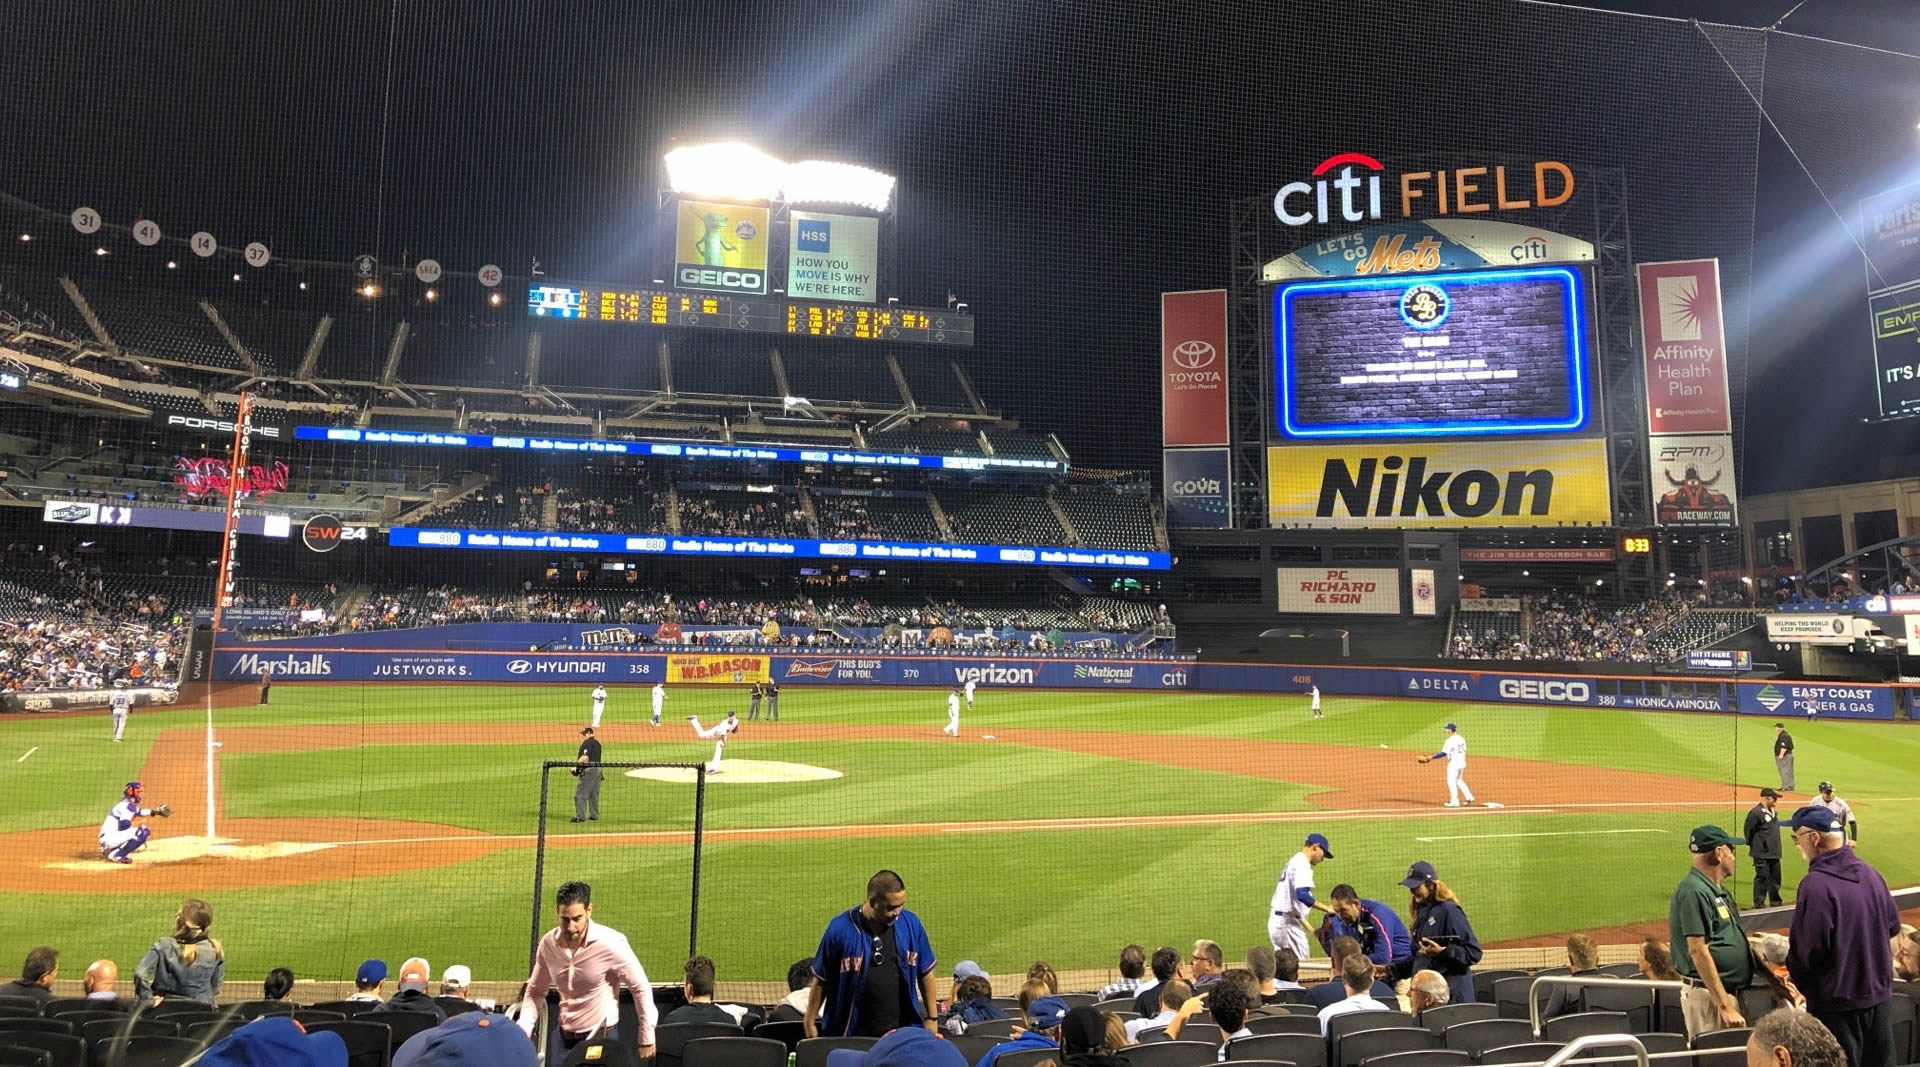 section 12, row 13 seat view  - citi field